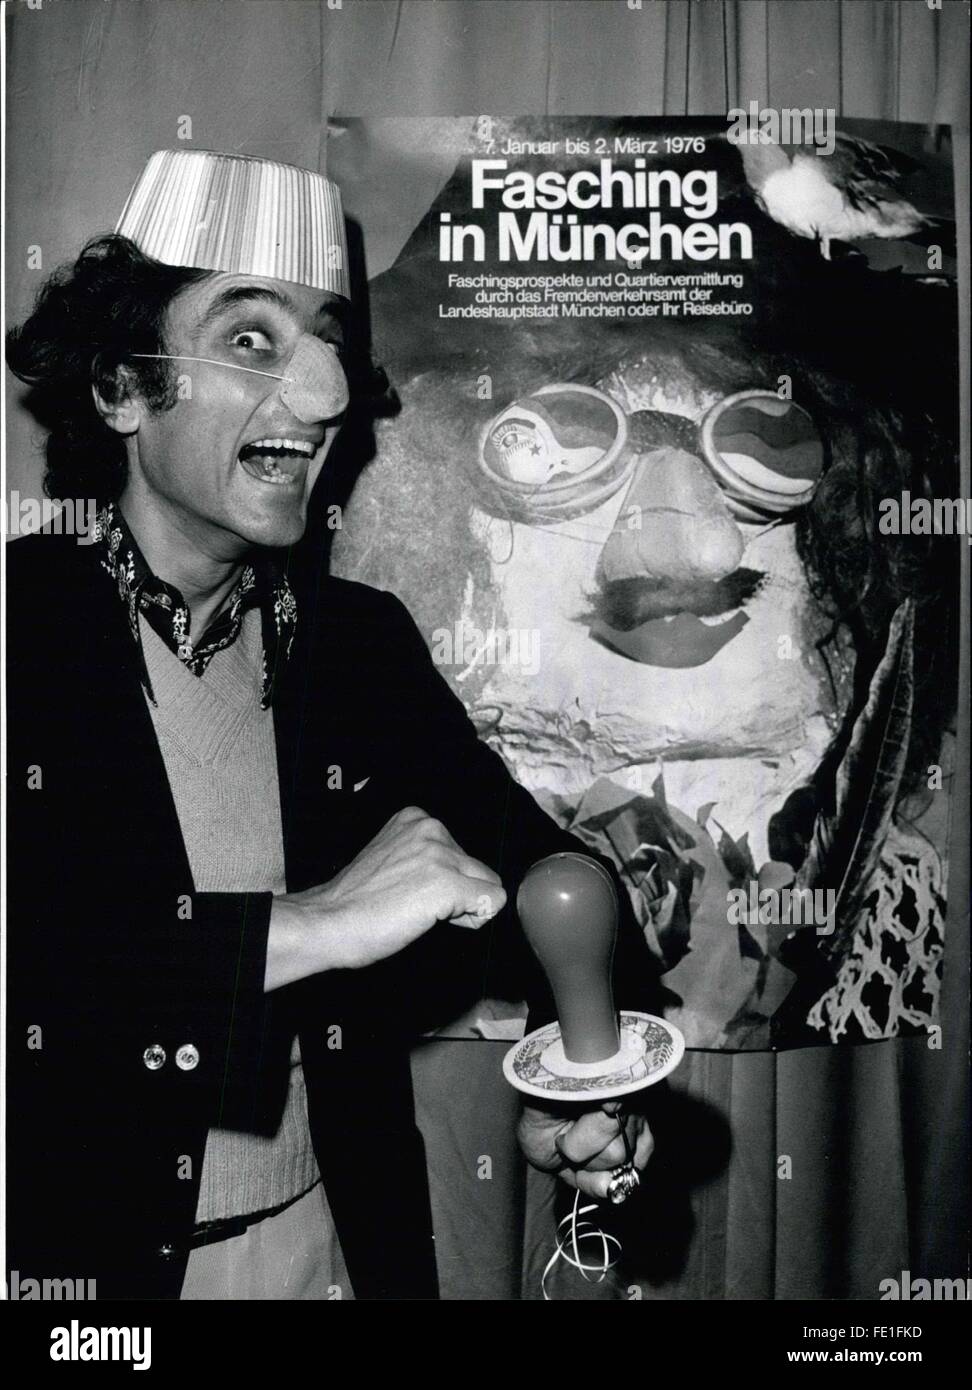 1976 - Samy Molcho Presents This Year's Carnival Poster of Munich. Having great fun is Samy Molcho (picture), the well known Israeli pantomime, while anticipating the carnival, which starts on January 7, 1976. He presented the carnival poster for the city of Munich for this season (in backgroud) and will take care of coming back to the Bavarian capital by that time to joy in the festives. © Keystone Pictures USA/ZUMAPRESS.com/Alamy Live News Stock Photo